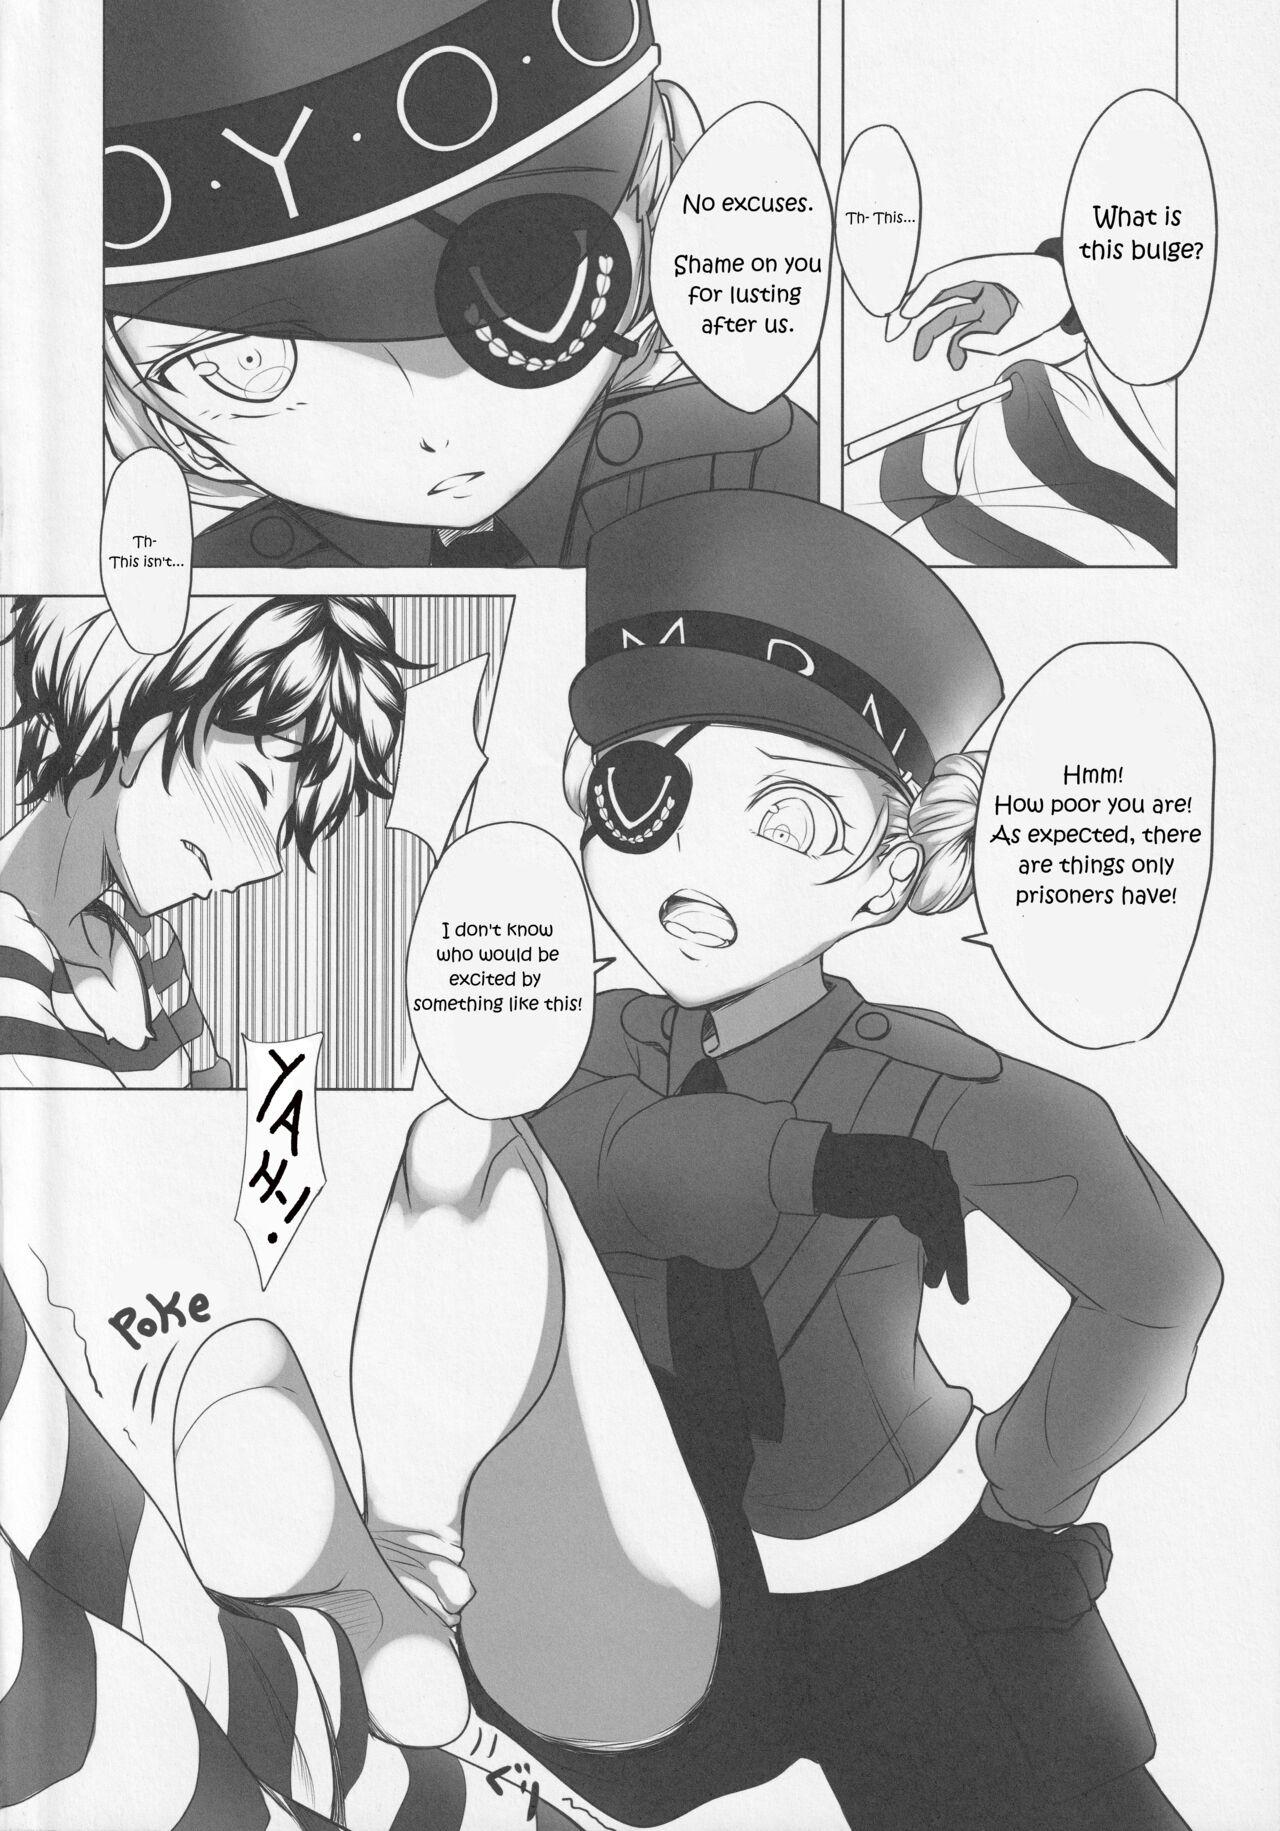 Blow Jobs Sounds Like You Need a Revive! - Persona 5 Bubble - Page 3